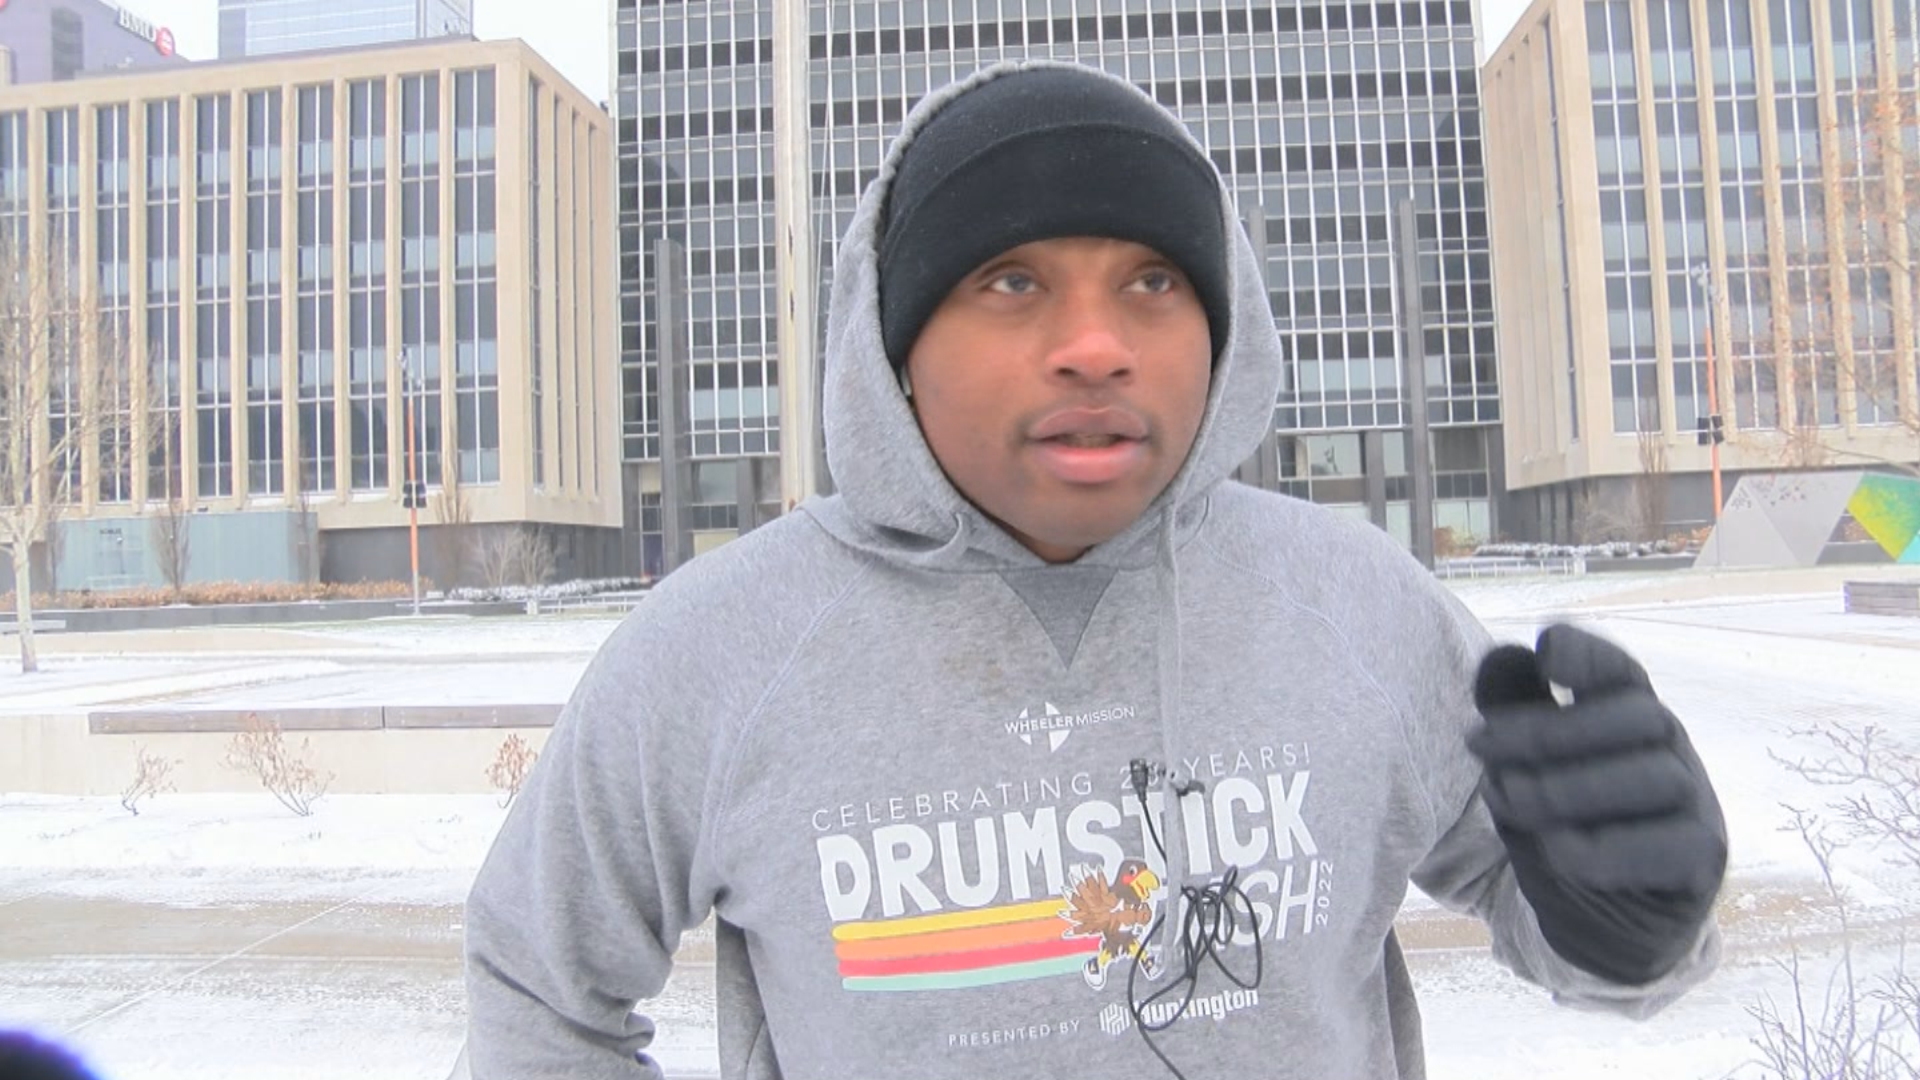 Hoosiers in Indianapolis brave cold temperatures for work, workouts